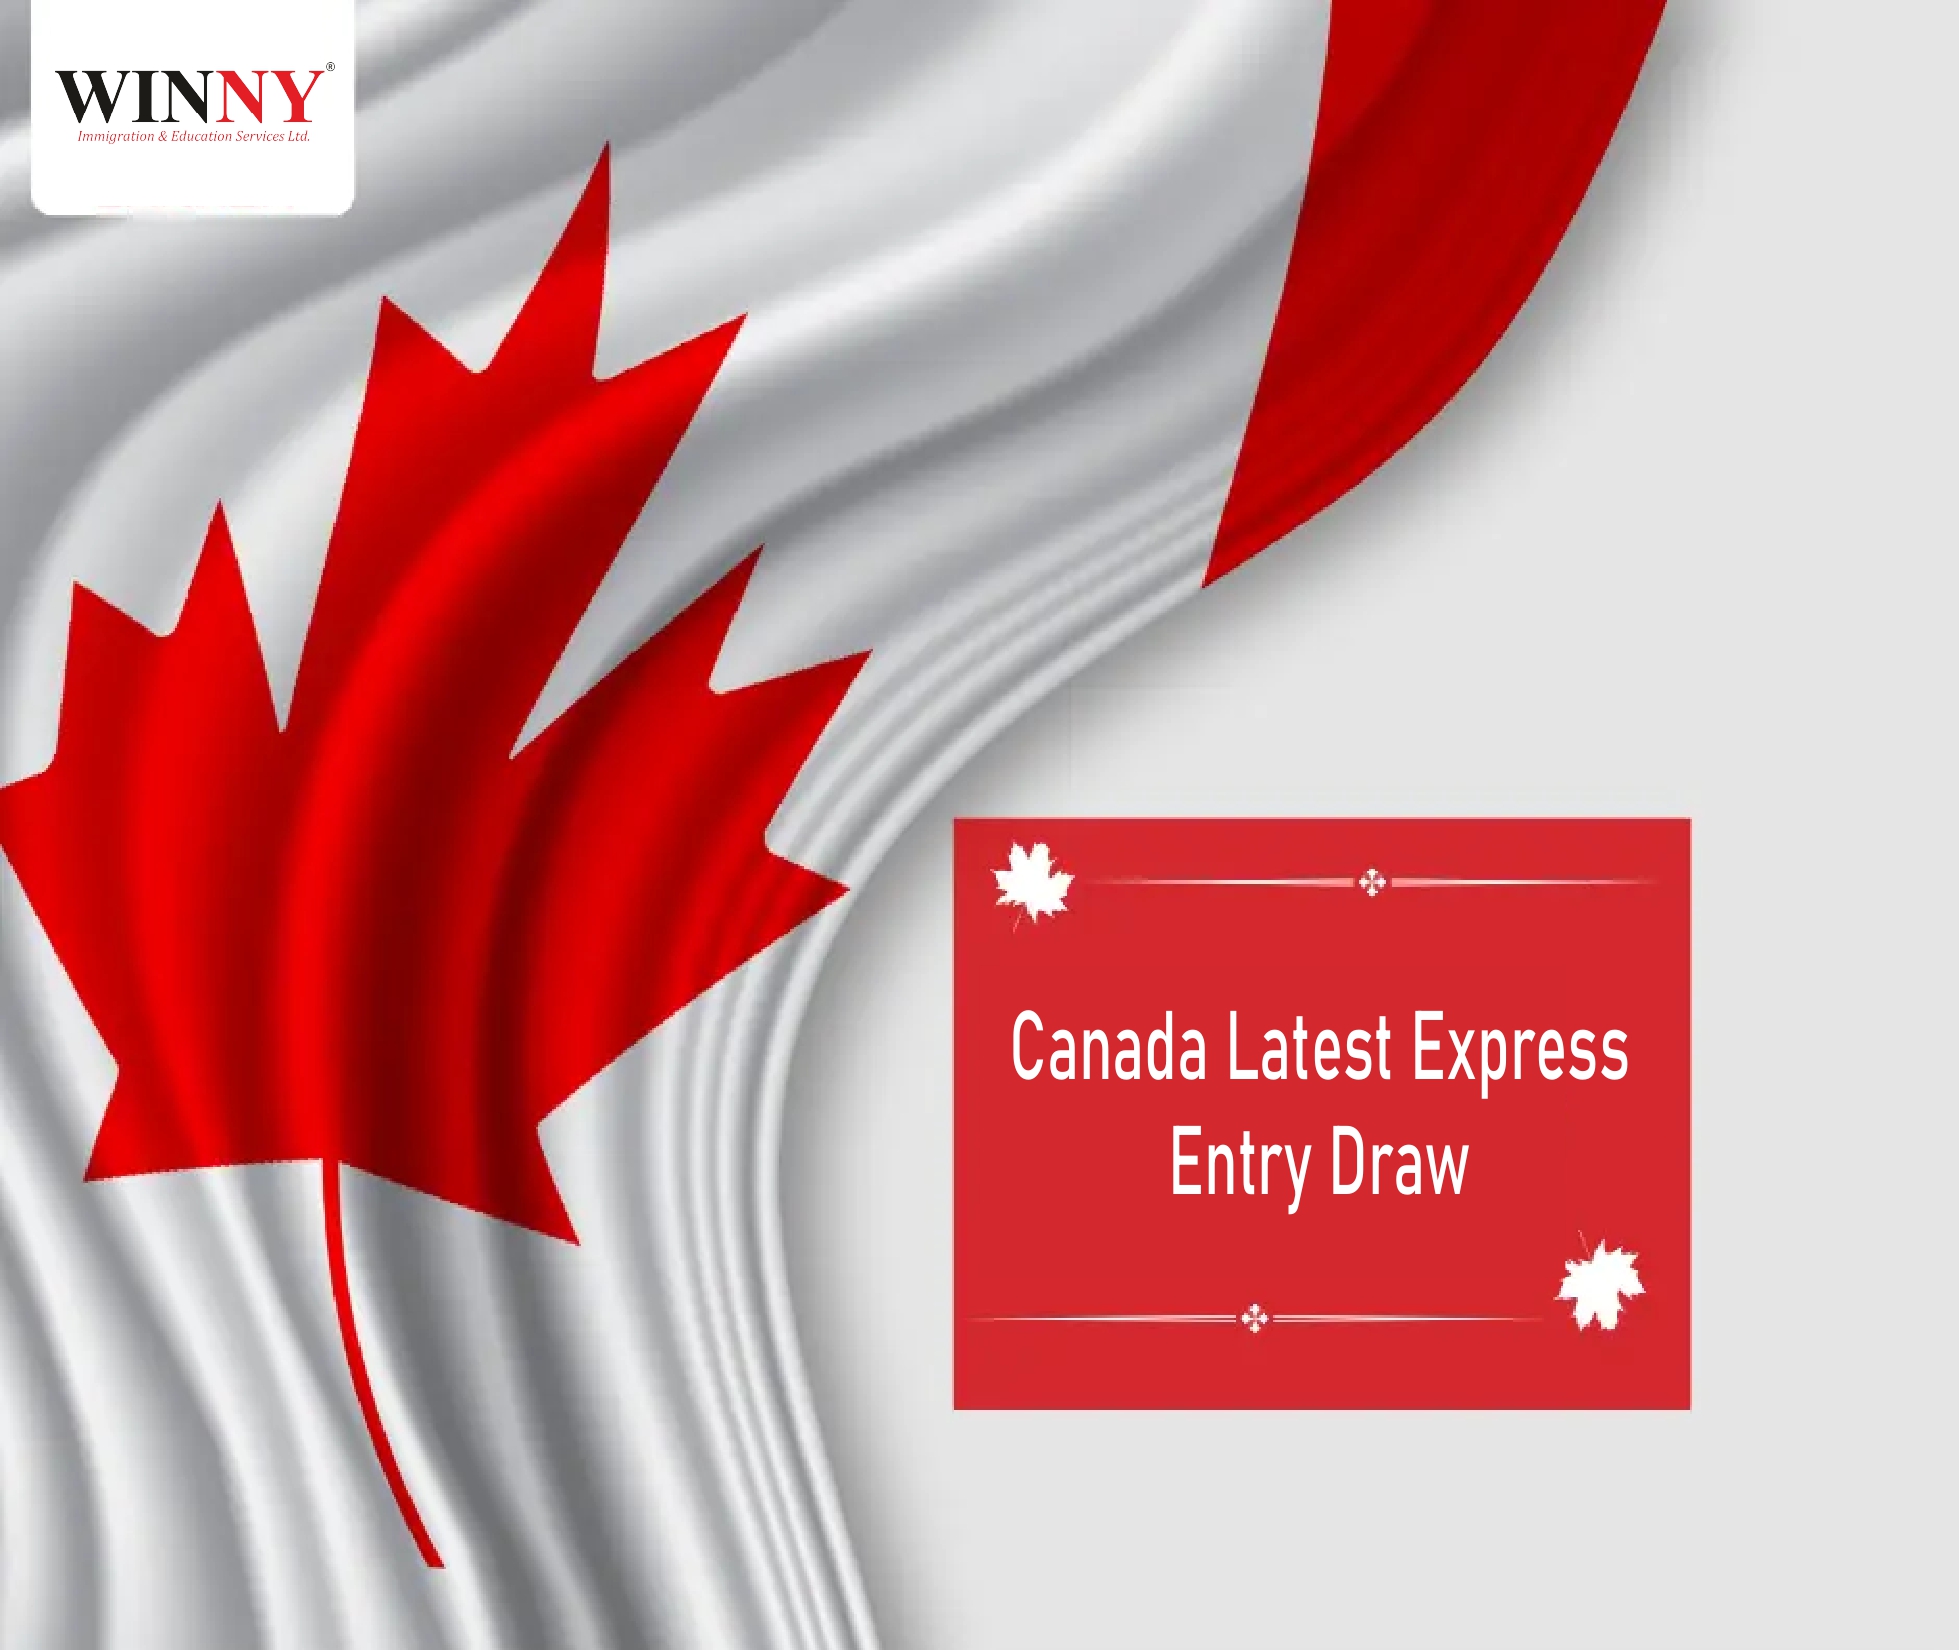 The Most Recent Express Entry Draw of Canada